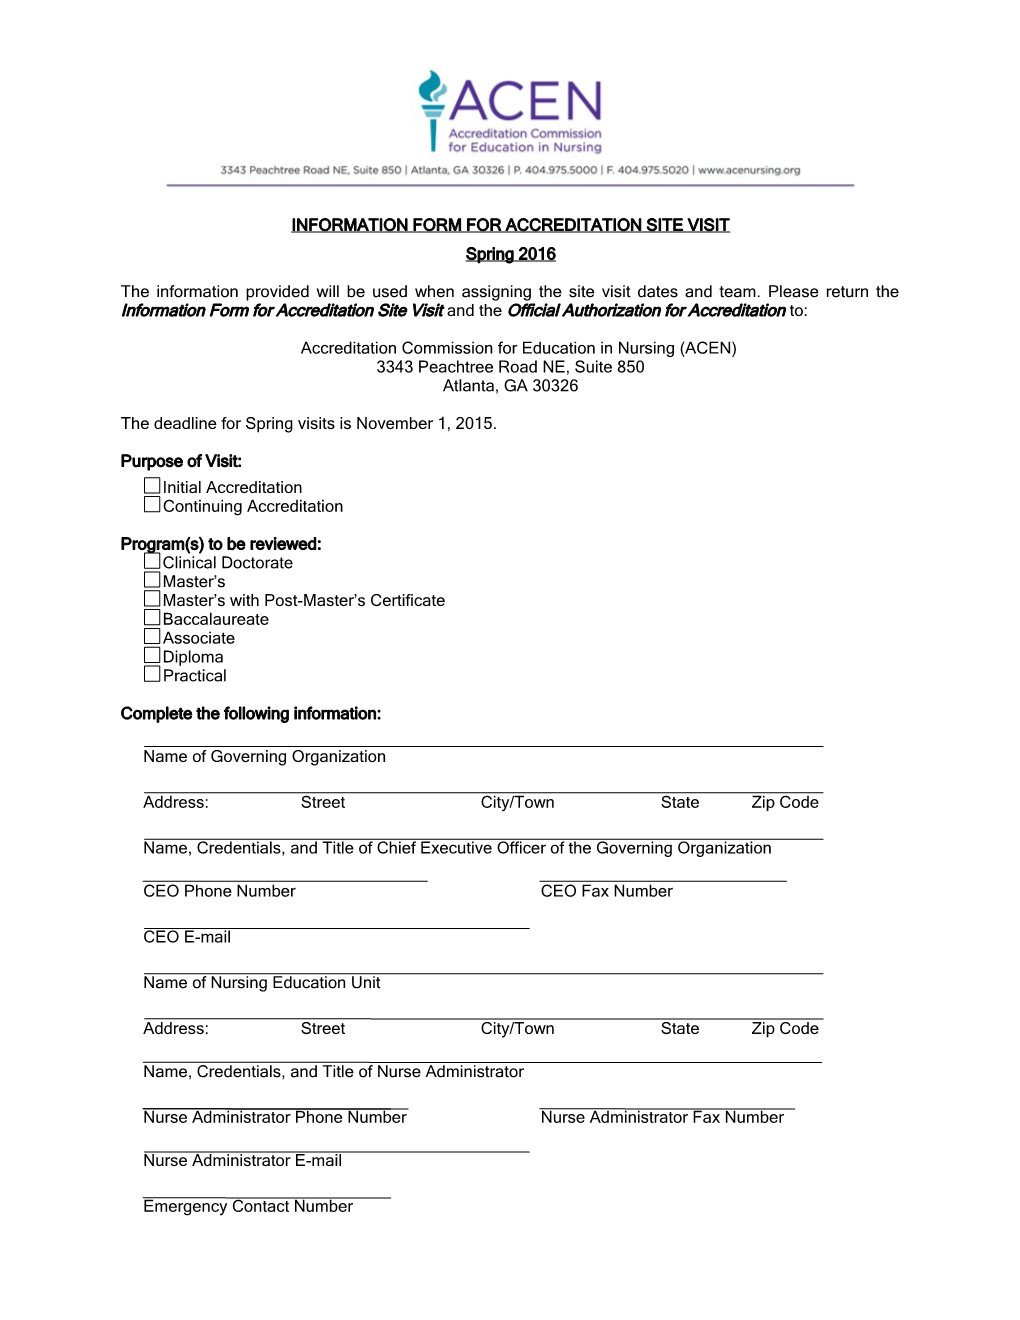 Application Form for Accreditation Visit